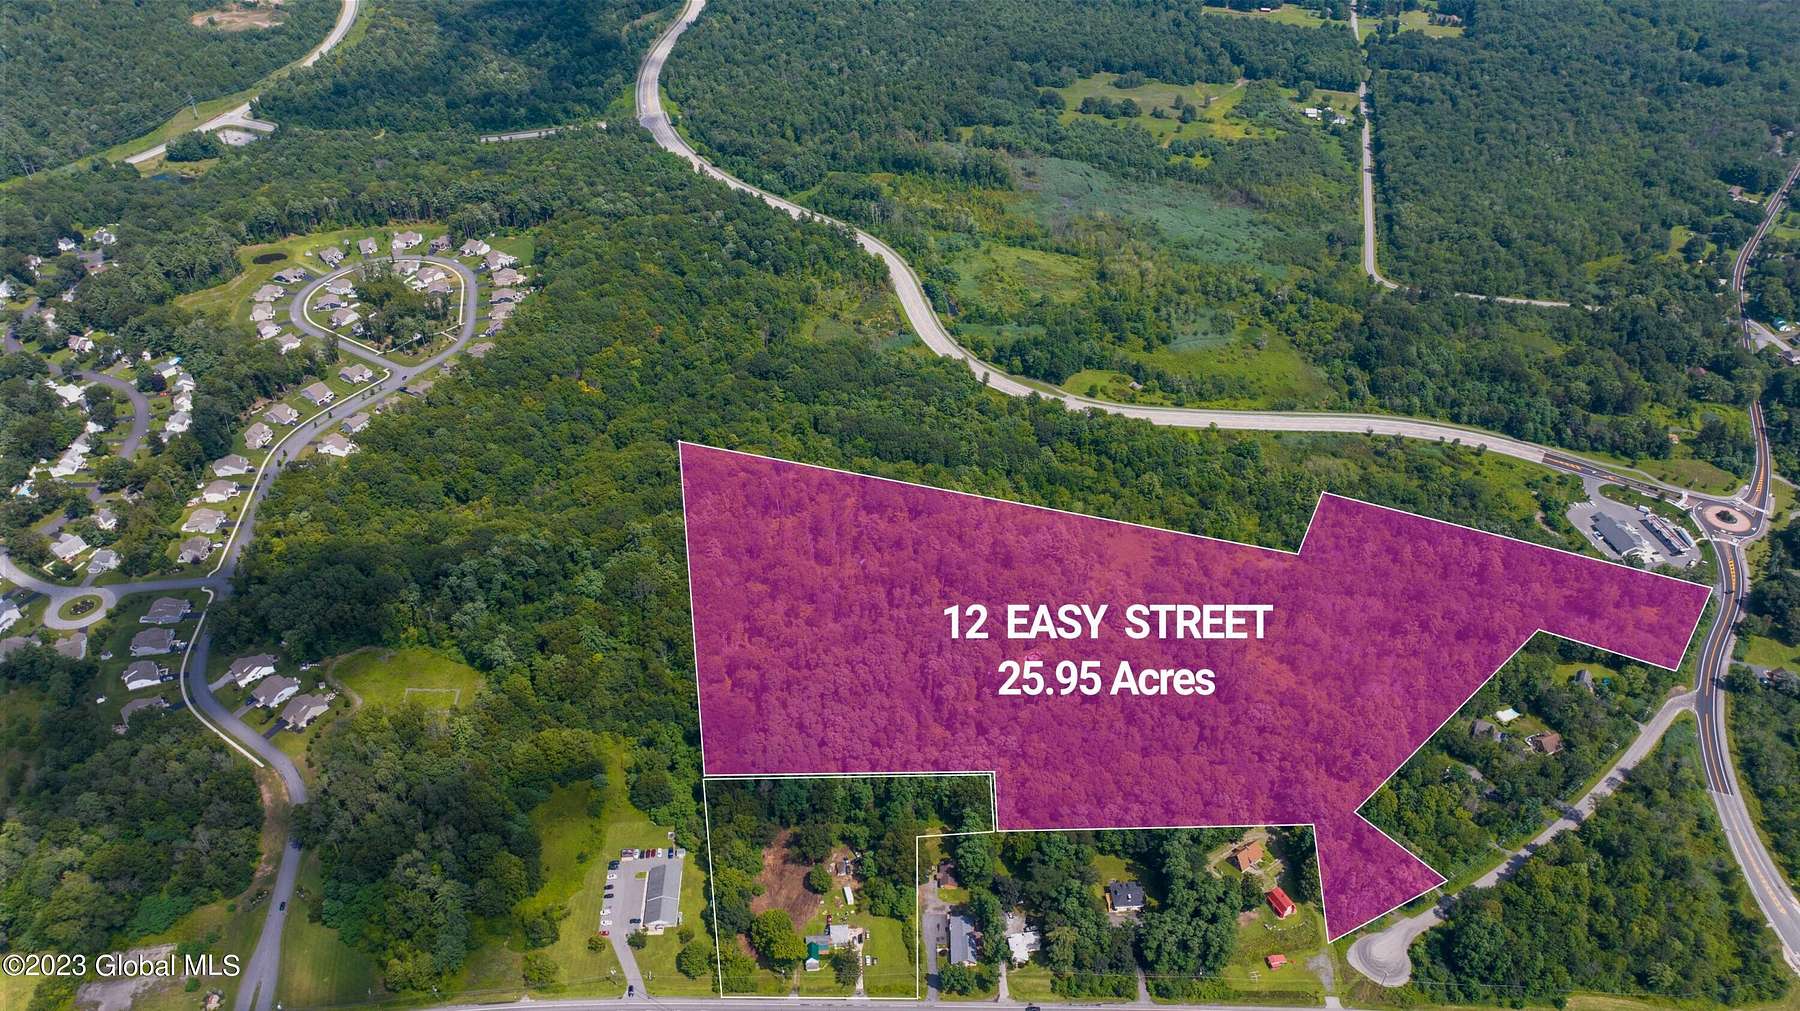 26 Acres of Commercial Land for Sale in Malta, New York